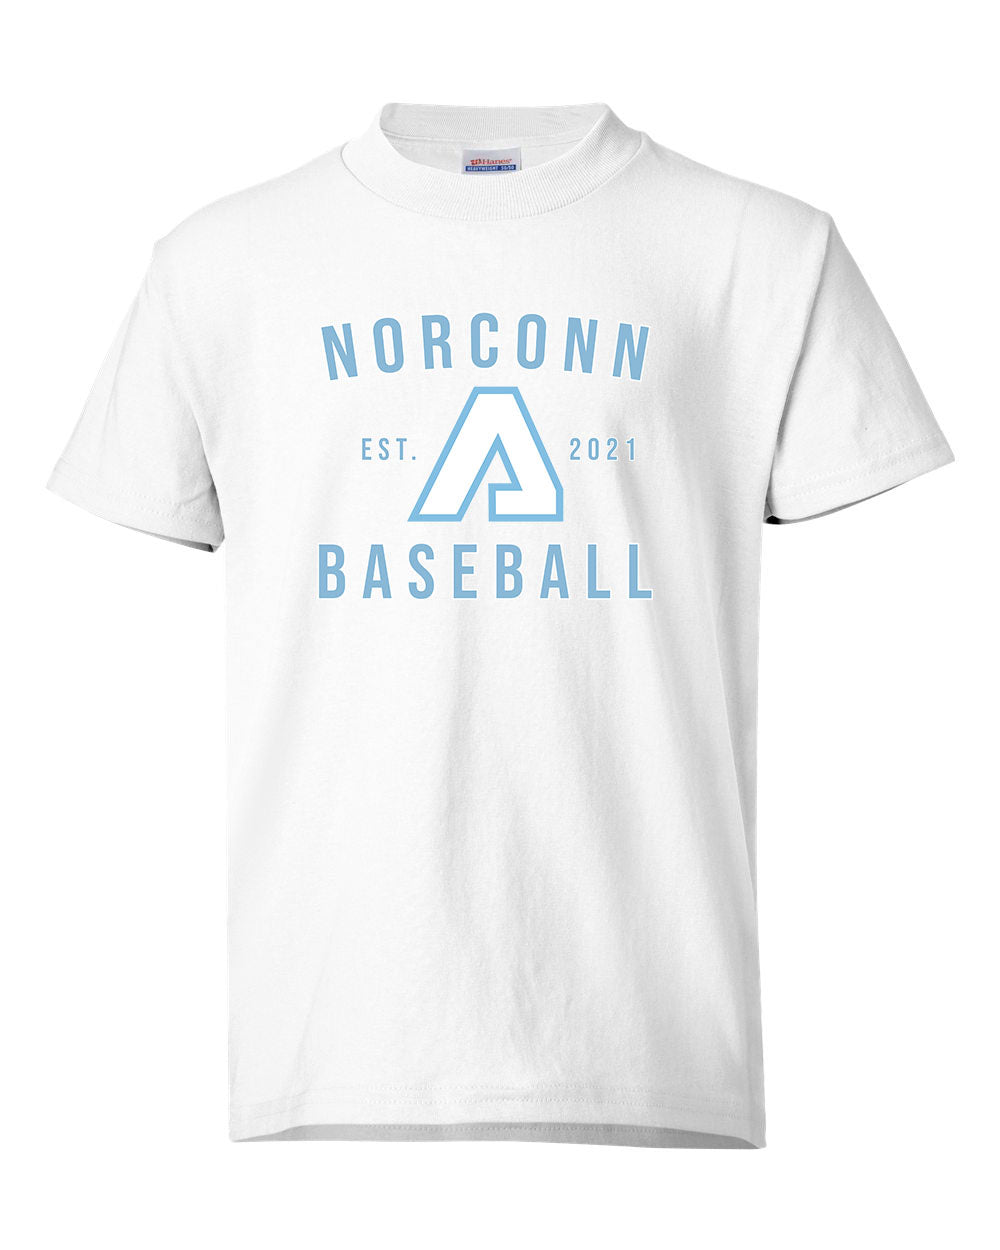 NorConn Youth T Shirt 50/50 Blend - 29BR (color options available)